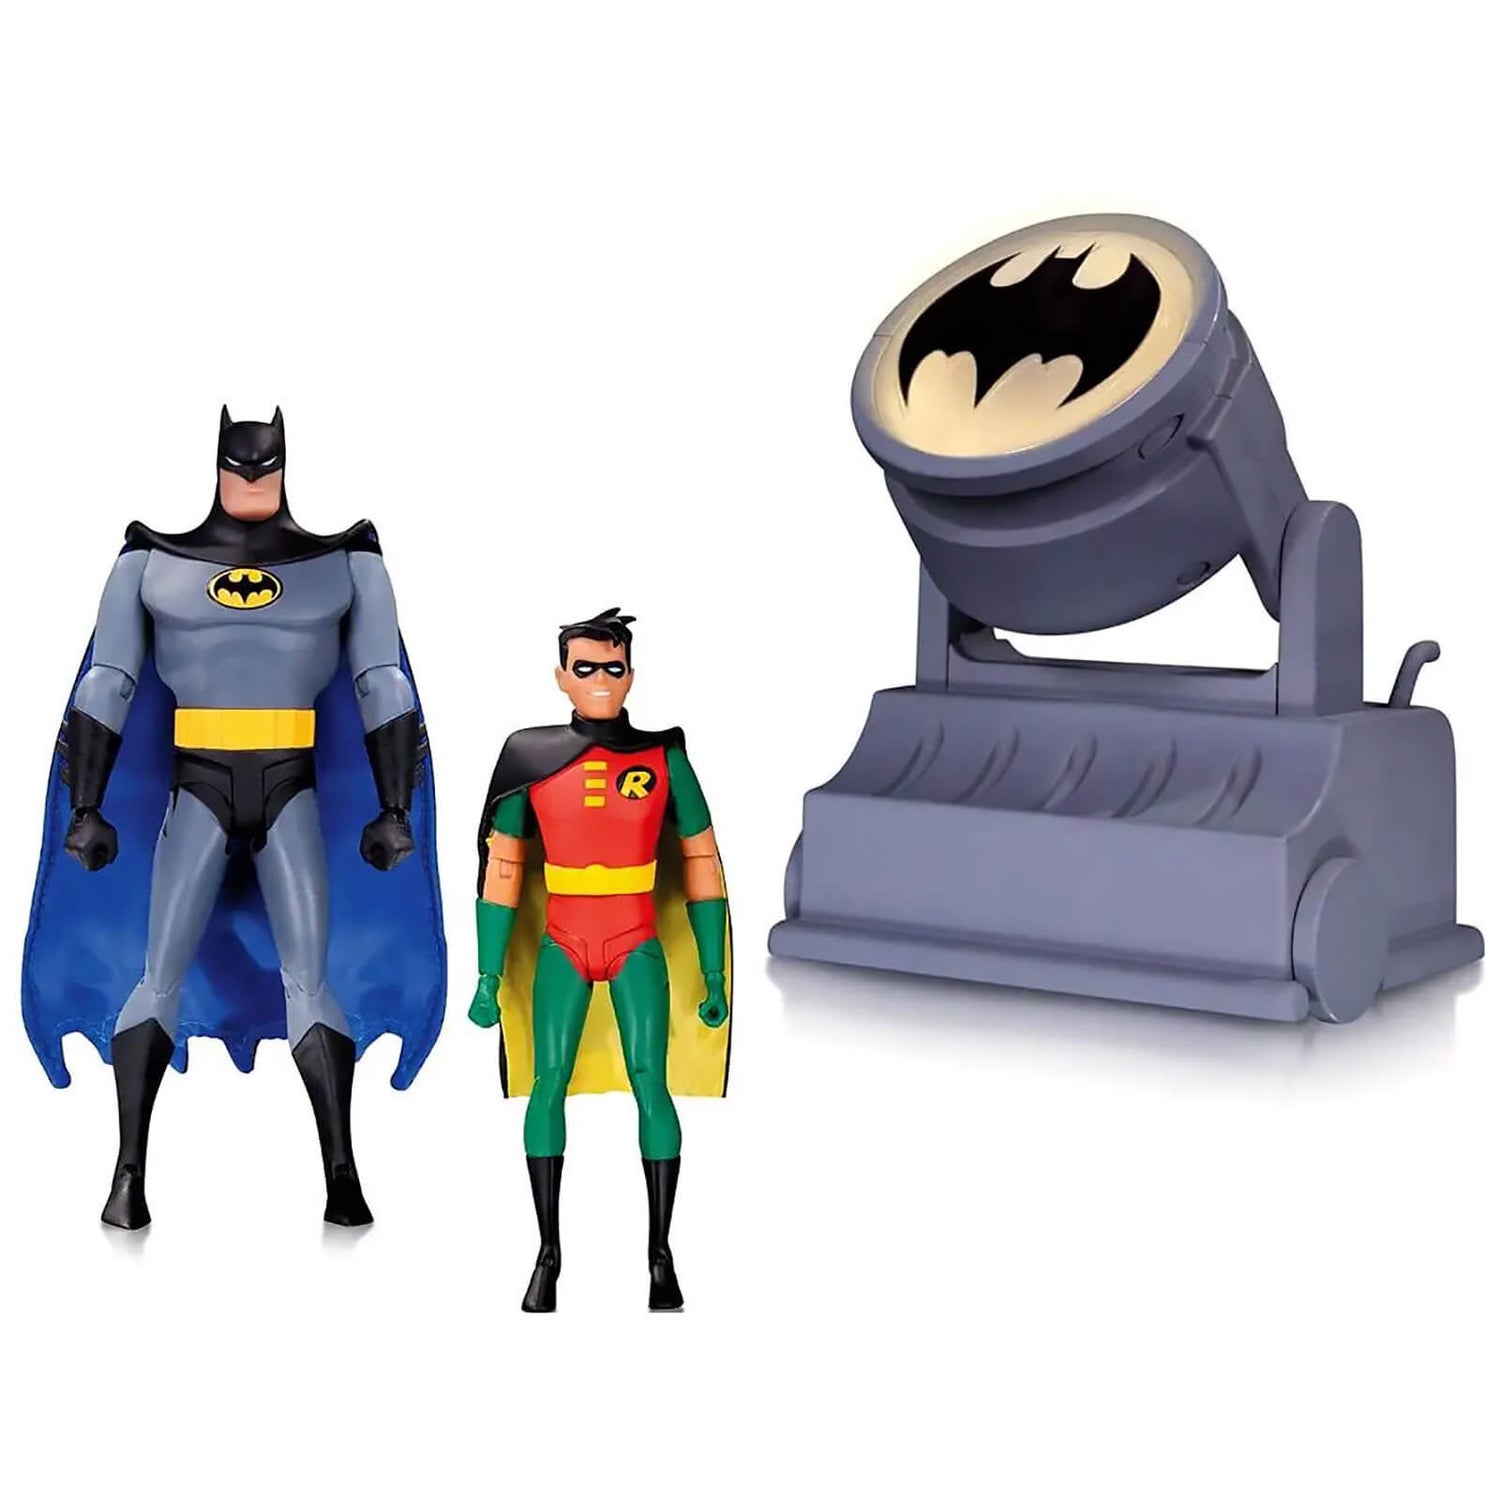 Batman Animated - DC 6 Inch Action Figure: Box Set - Batman & Robin 2-Pack (With Bat-Signal / The Animated Series Version)